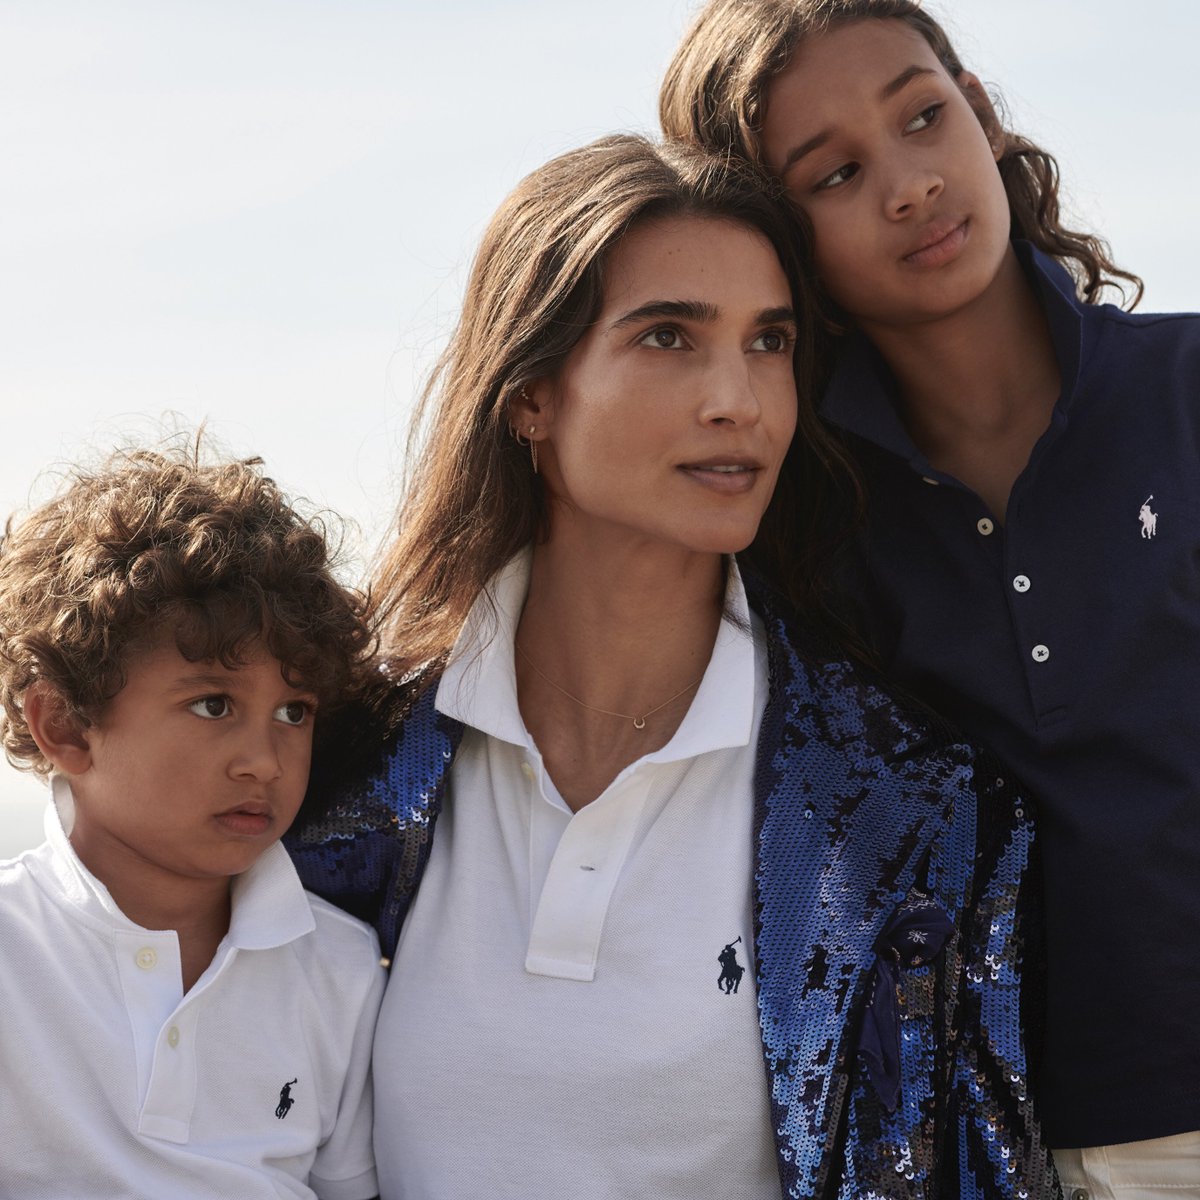 Ralph Lauren Debuts 'Family Is Who You Love' Campaign